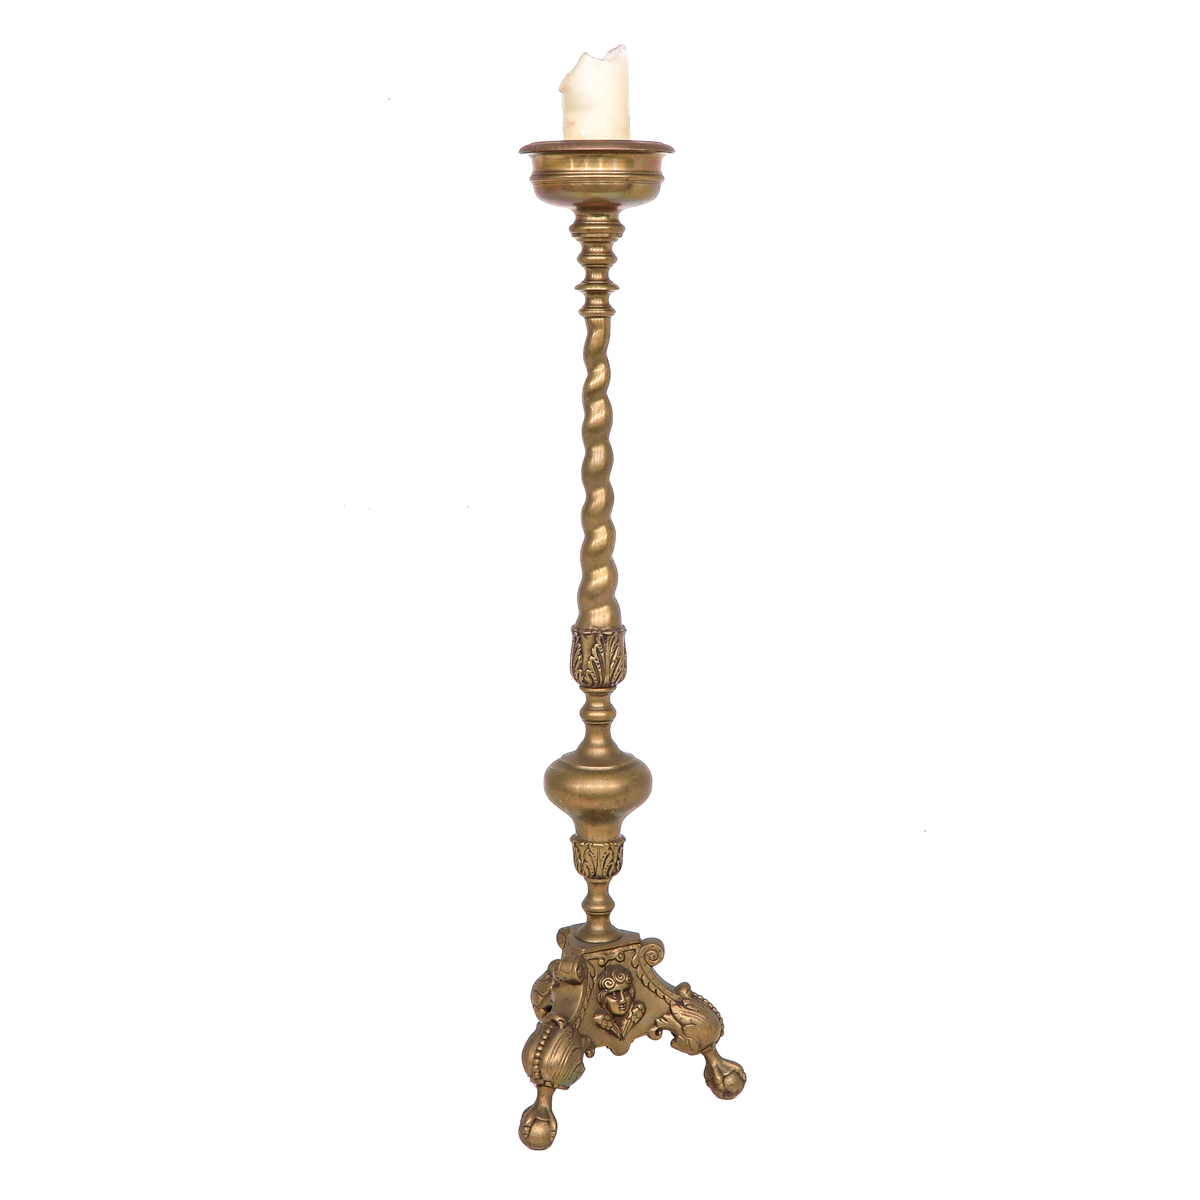 A Bronze Altar Candlestick - Image 4 of 9